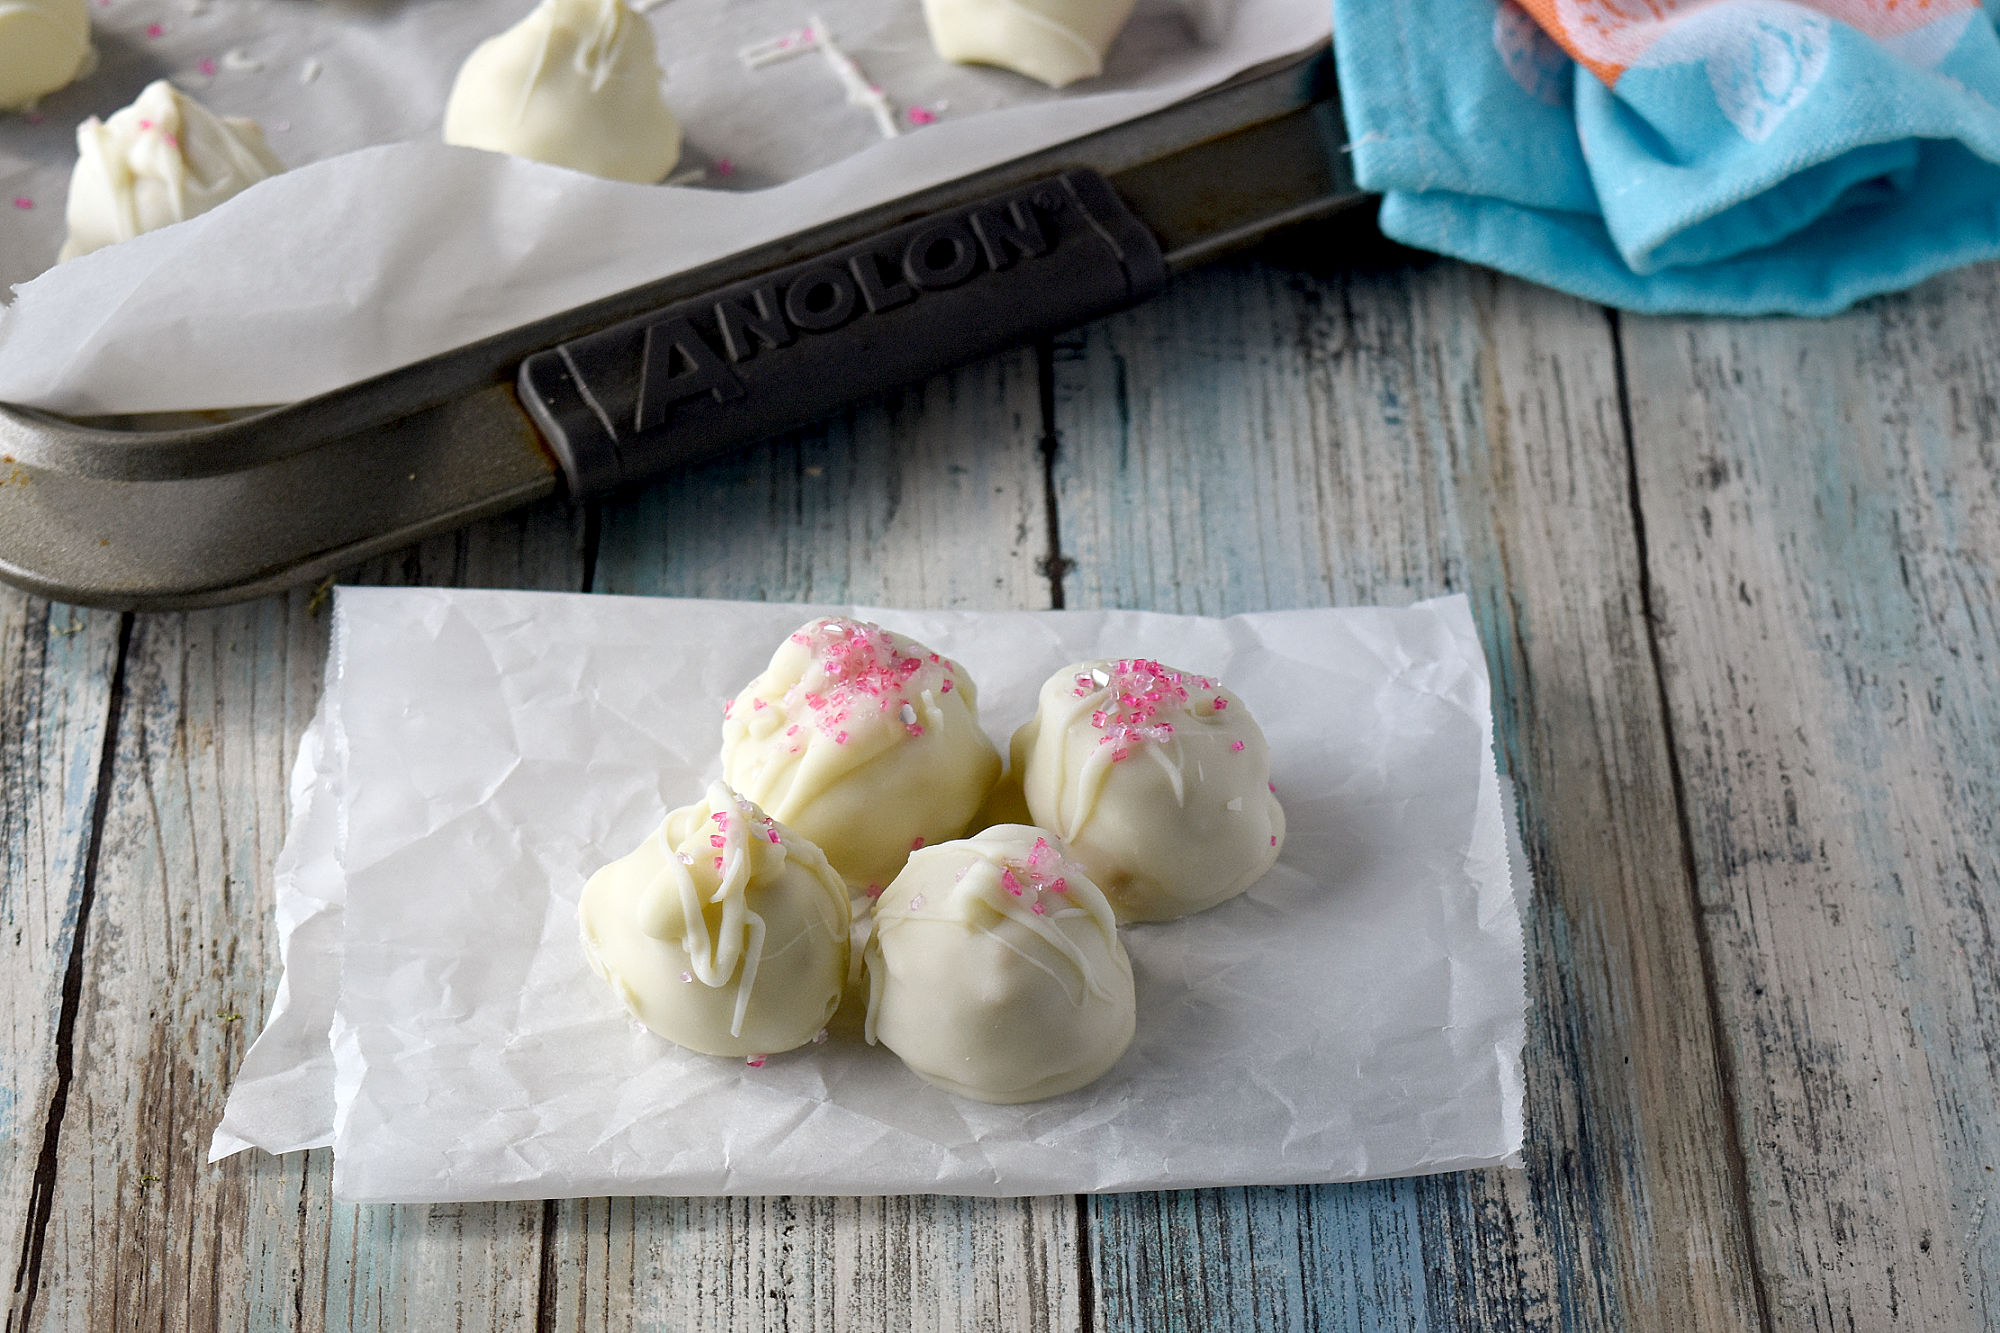 Meyer Lemon Ginger Cookie Truffles are vibrant and full of ginger flavor with a hint of lemon. The stem ginger cookies are the perfect pairing with bright, Meyer lemons making these absolutely perfect for spring. #SpringSweetsWeek